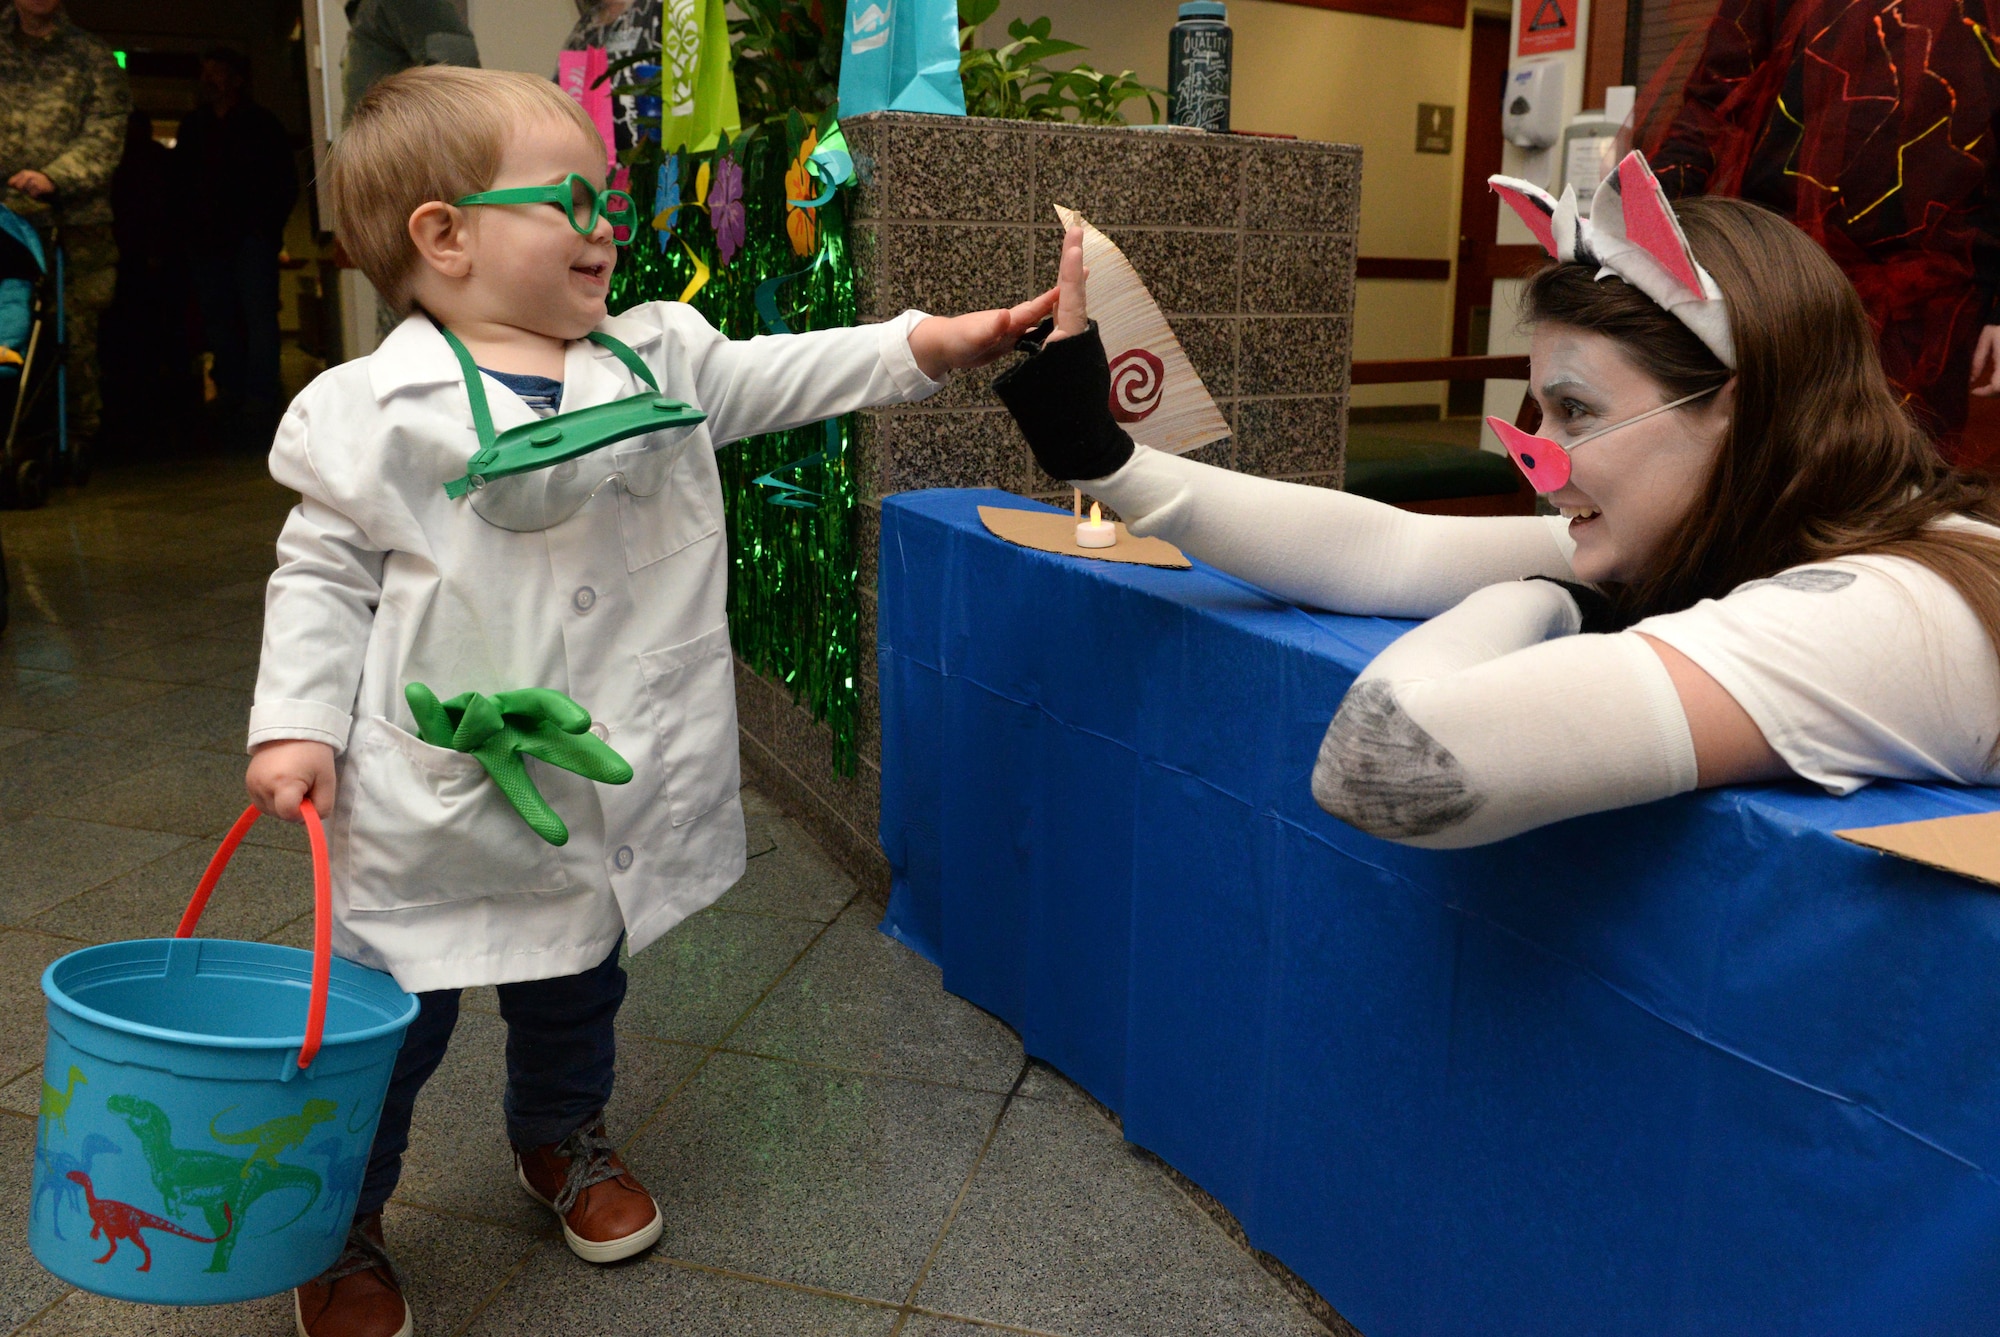 David, son of Tech. Sgt. John Jenkins, non-commissioned officer in charge, weather specialty teams, greets the 673d Medical Support Squadron Women’s Health Clinic staff member at the annual 673d Medical Group trick-or-treat event at Joint Base Elmendorf-Richardson, Alaska, Oct. 27, 2017. During this event the hospital will transform the clinic lobbies into themed stages for costumed hospital staff to pass out candy to participants on Oct. 26, 2018.